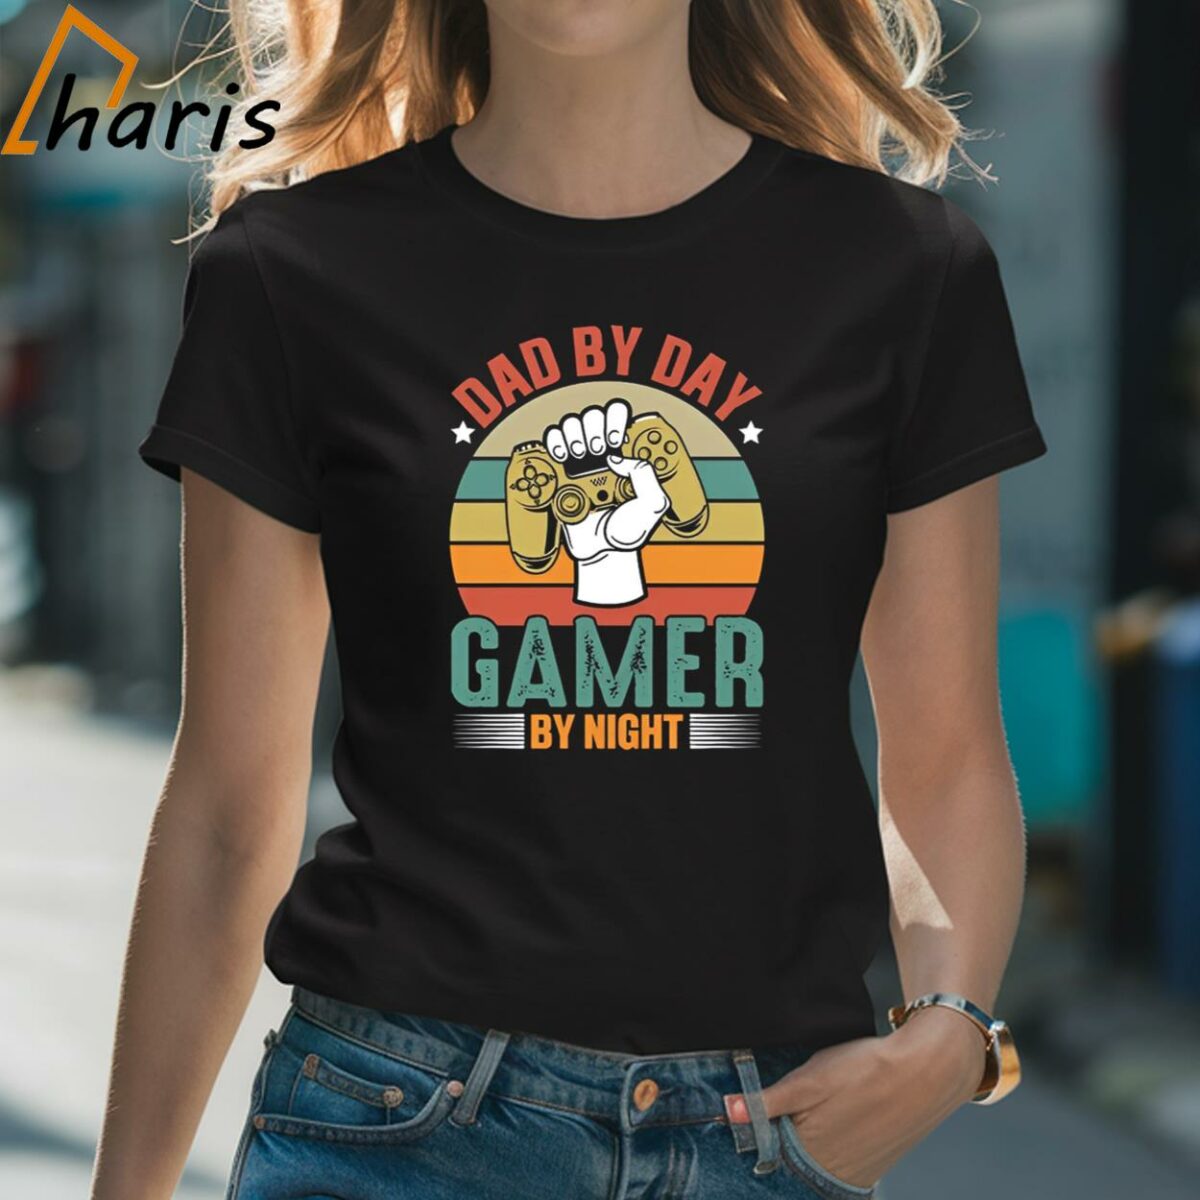 Dad By Day Gamer By Night T shirt 2 Shirt